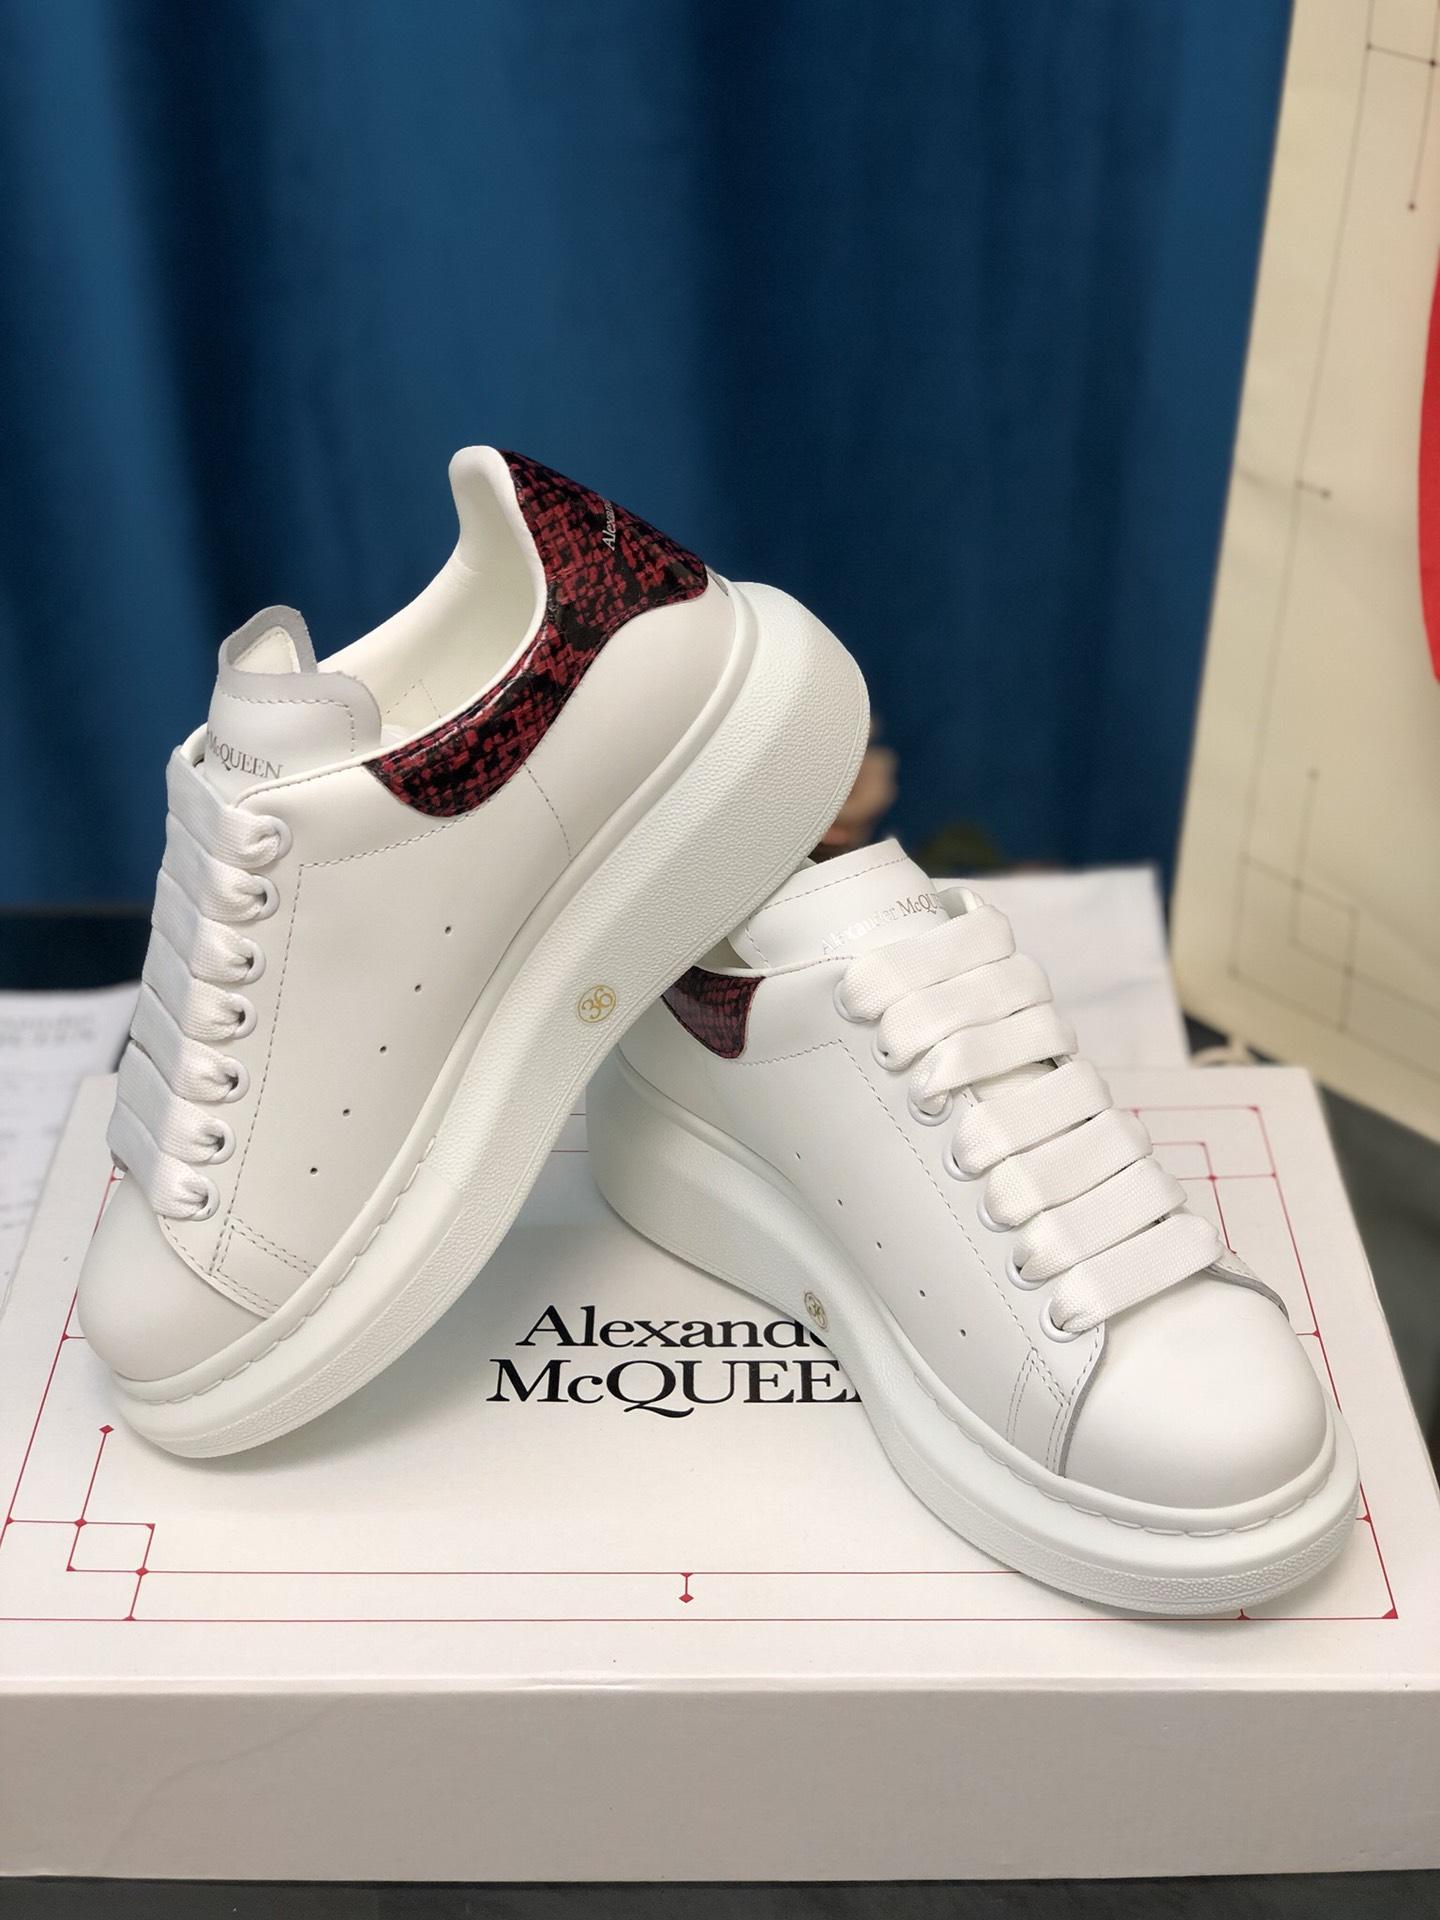 Alexander McQueen Fahion Sneakers White with Black red snake heel MS100007